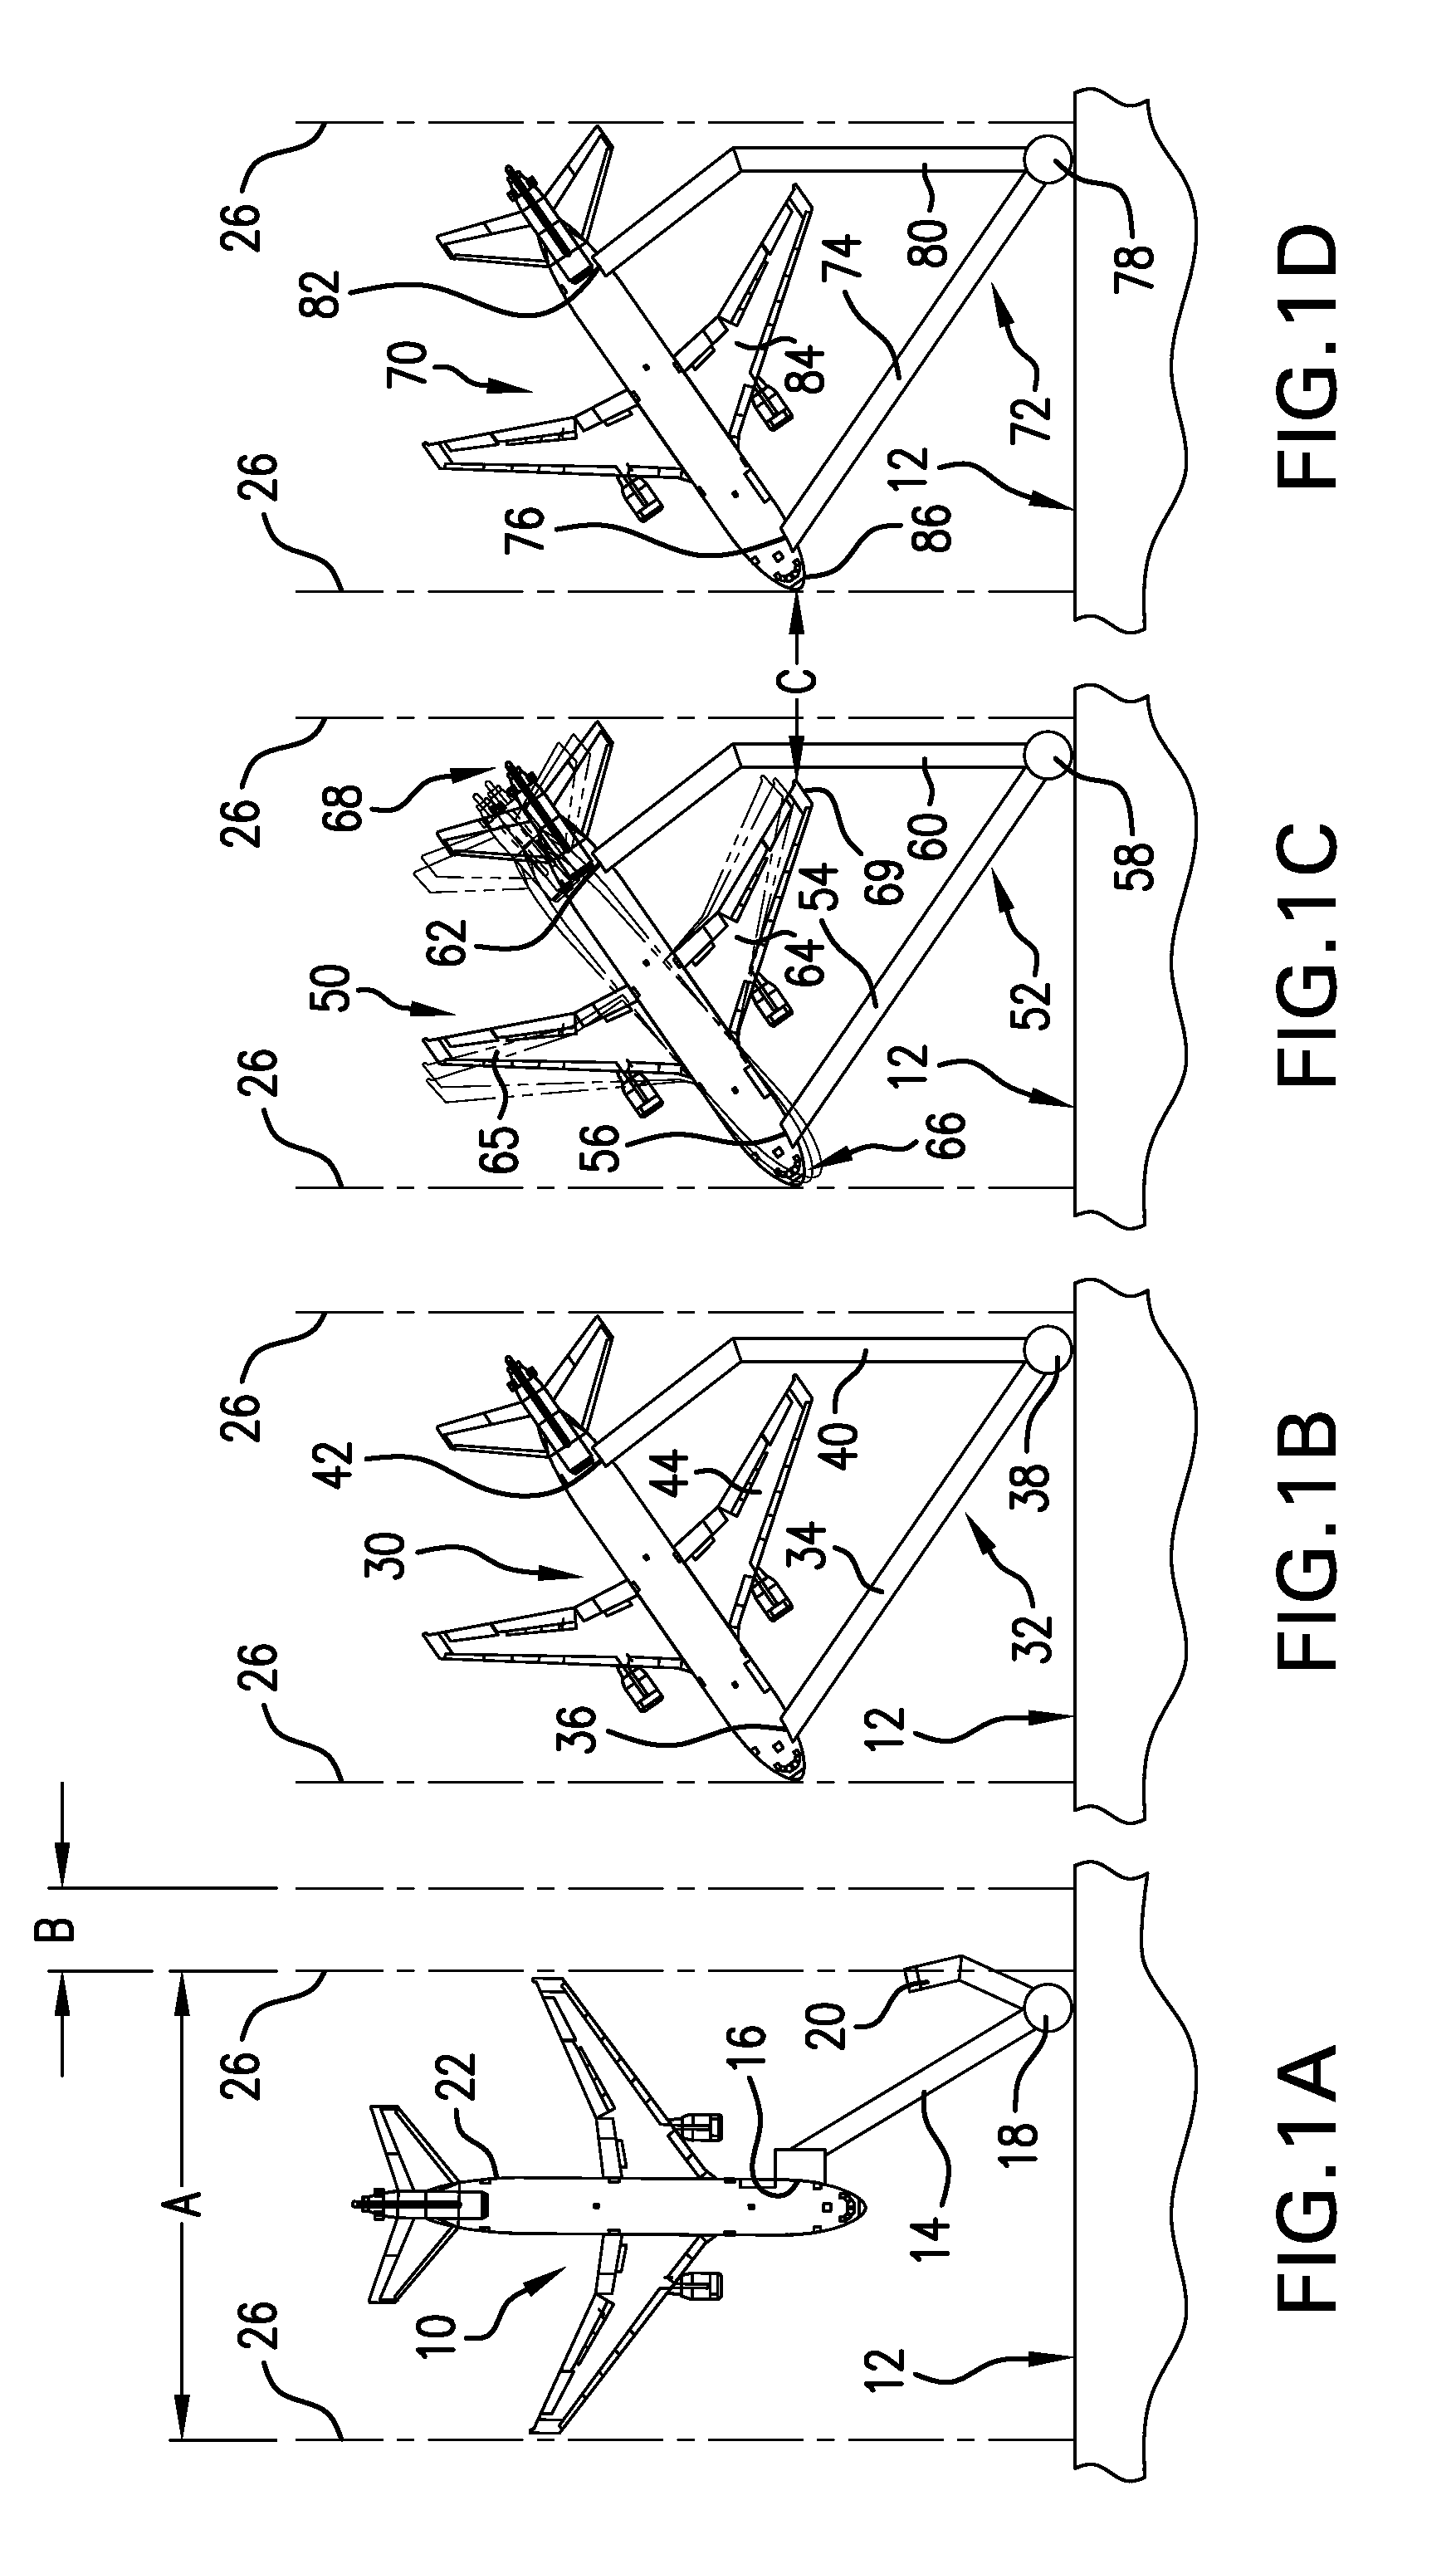 Aircraft Gate Parking and Servicing Method